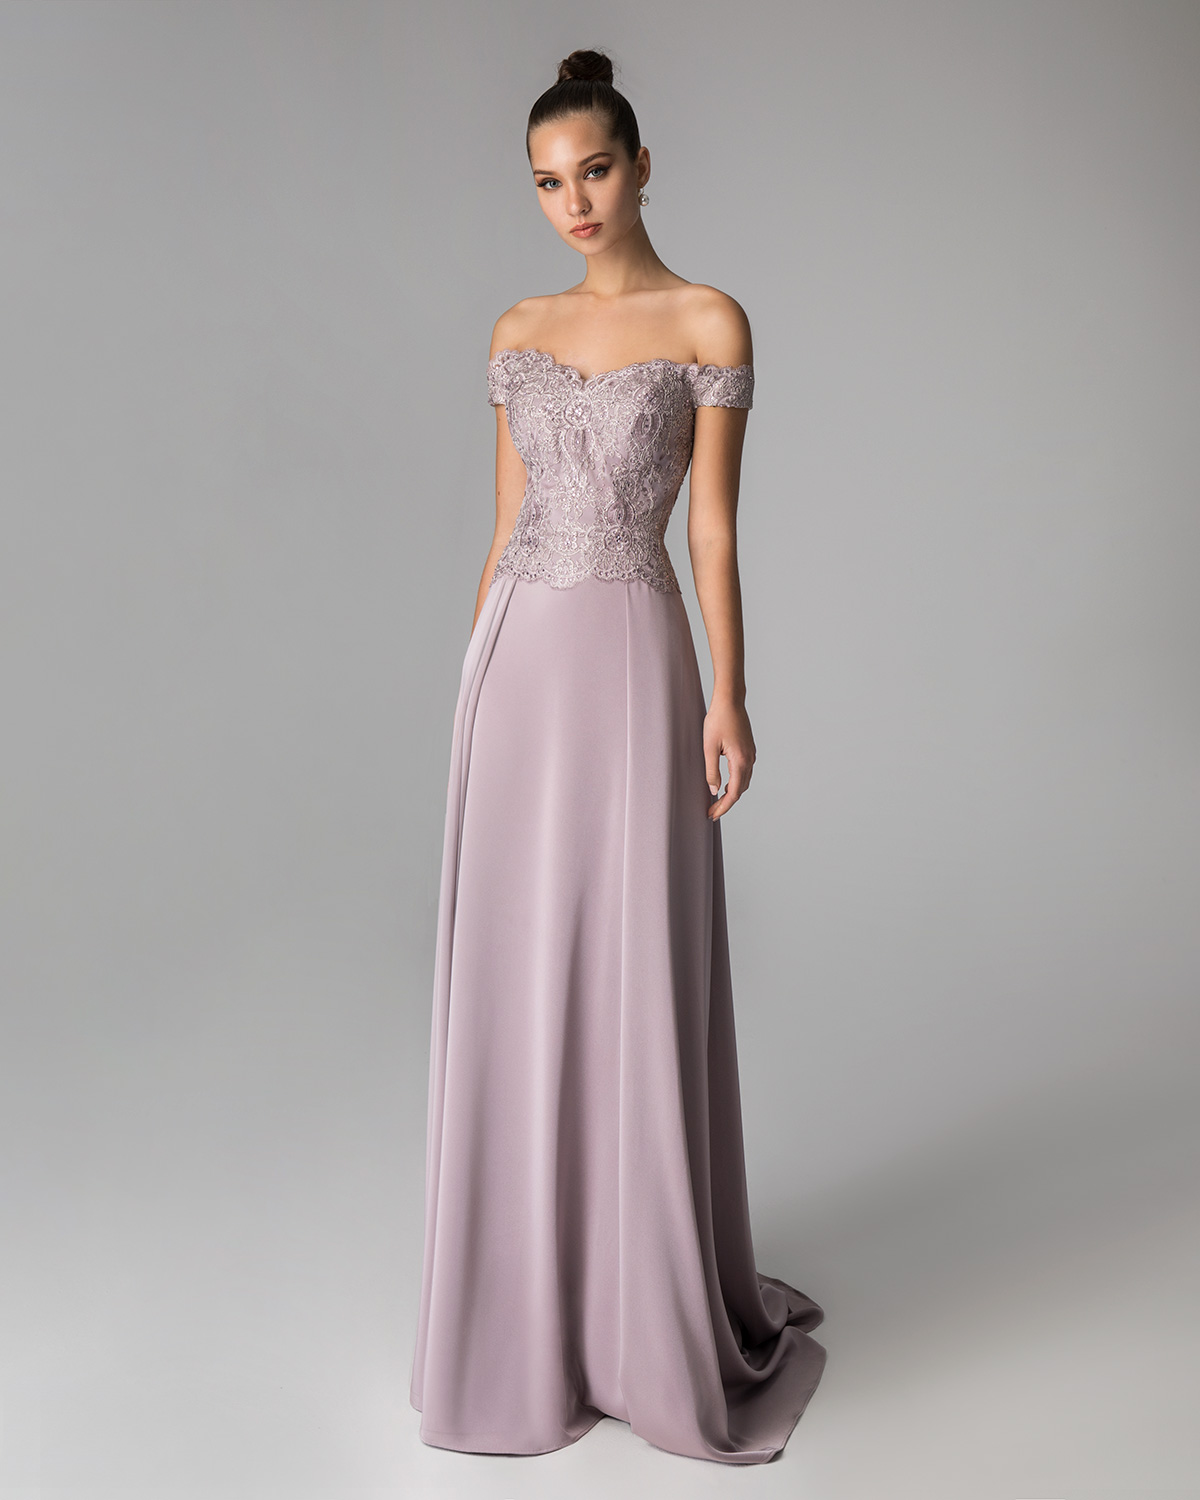 Classic Dresses / Long evening dress with beaded top